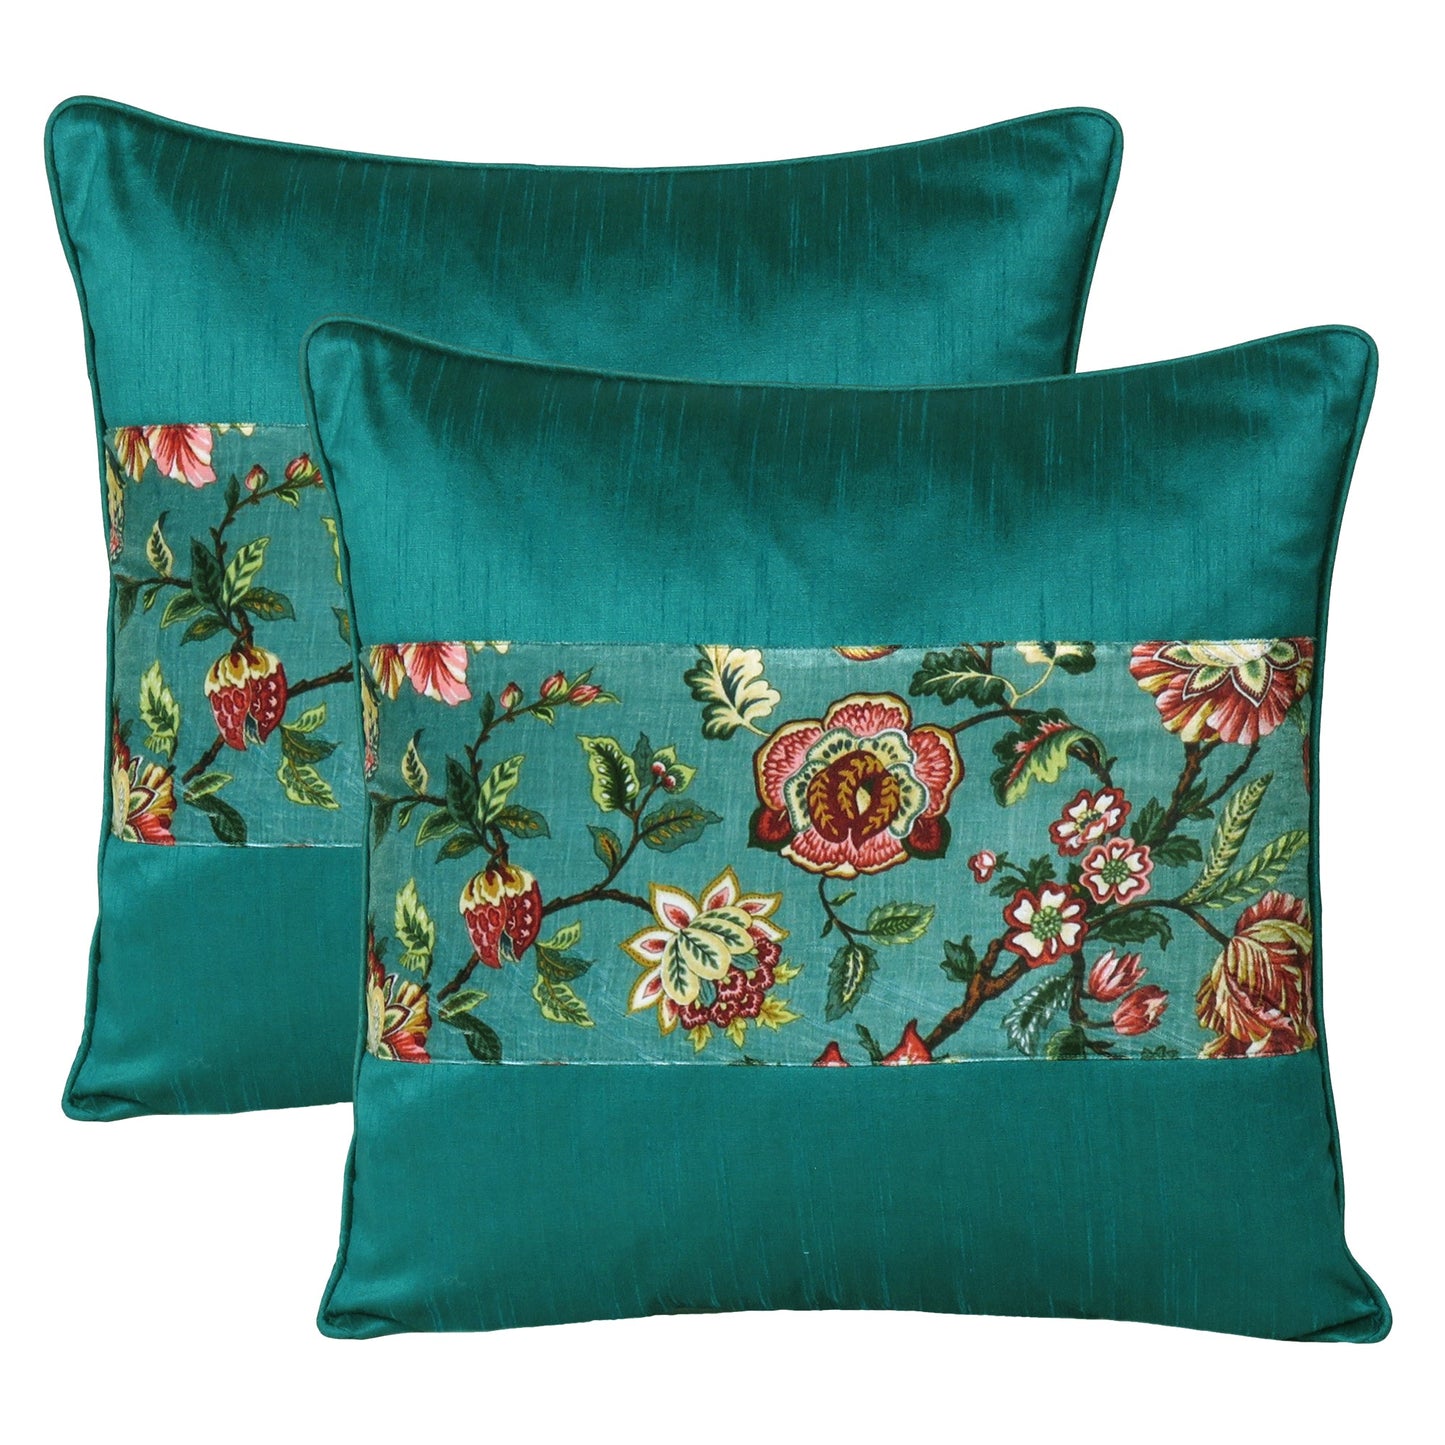 Velvet Polydupion Decorative Printed Cushion Cases in Set of 2 - Green